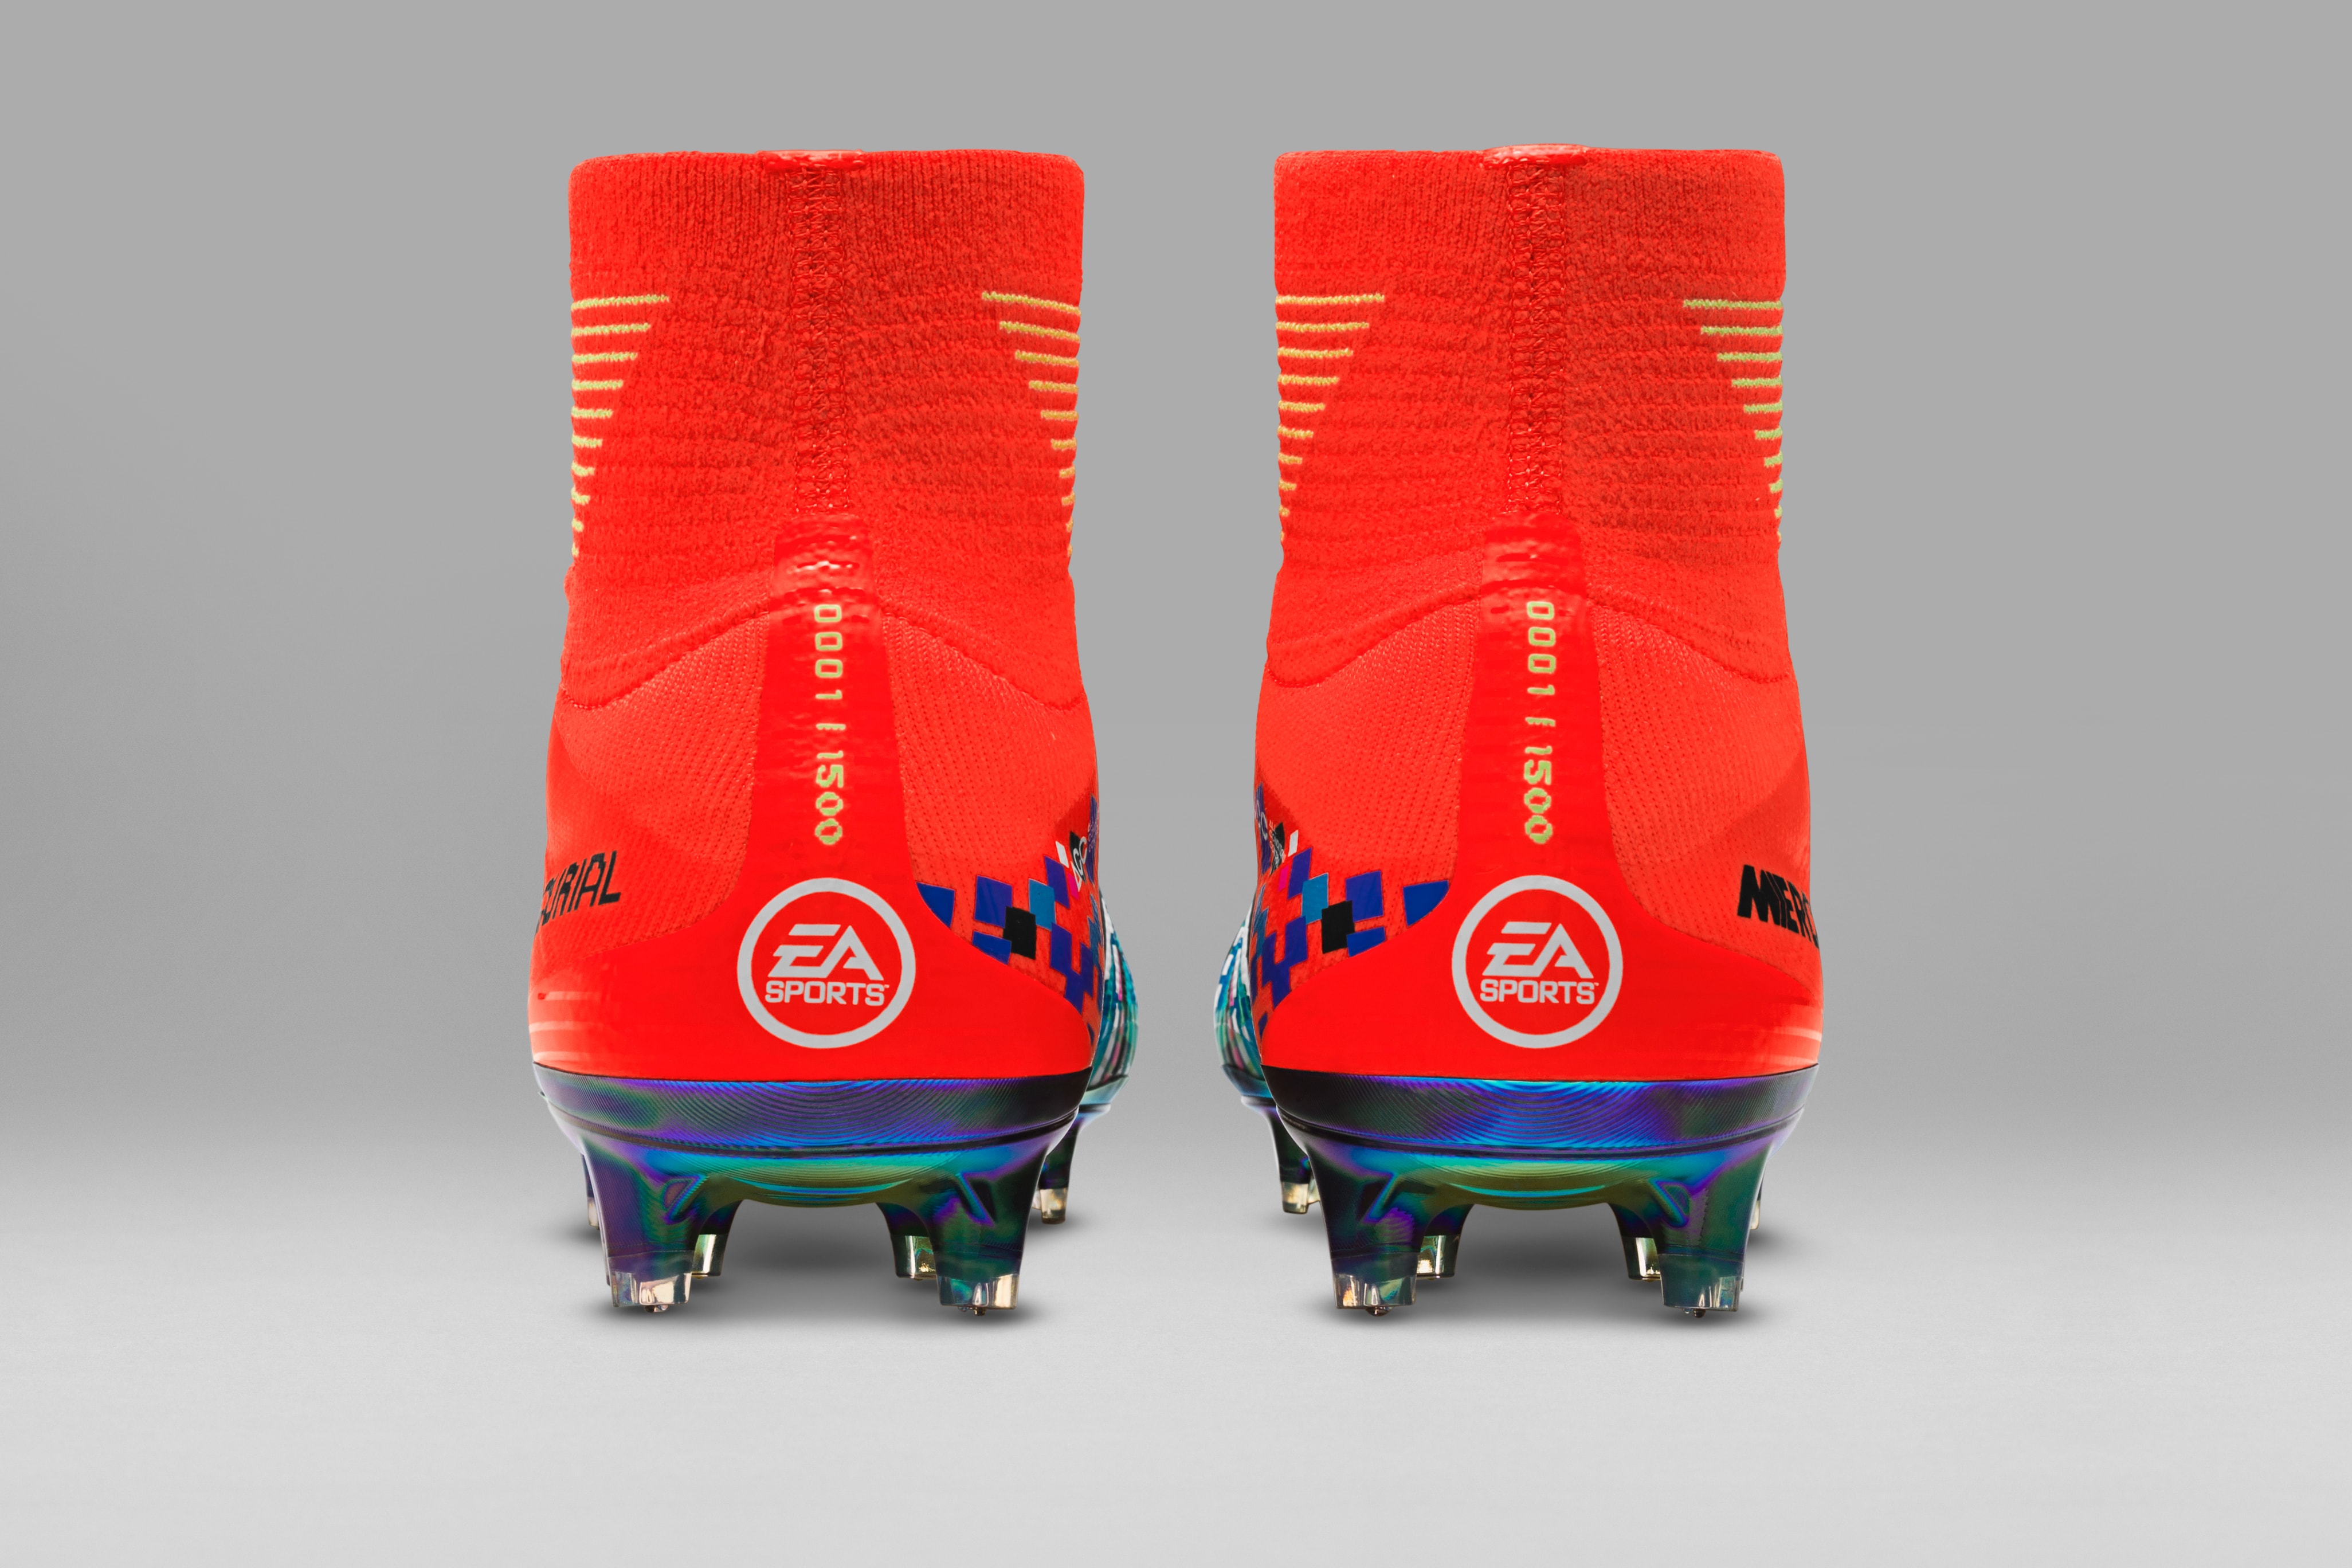 Nike's Mercurial Superfly x EA Sports Football Cleats are a Pixilated Dream soccer field sport FIFA